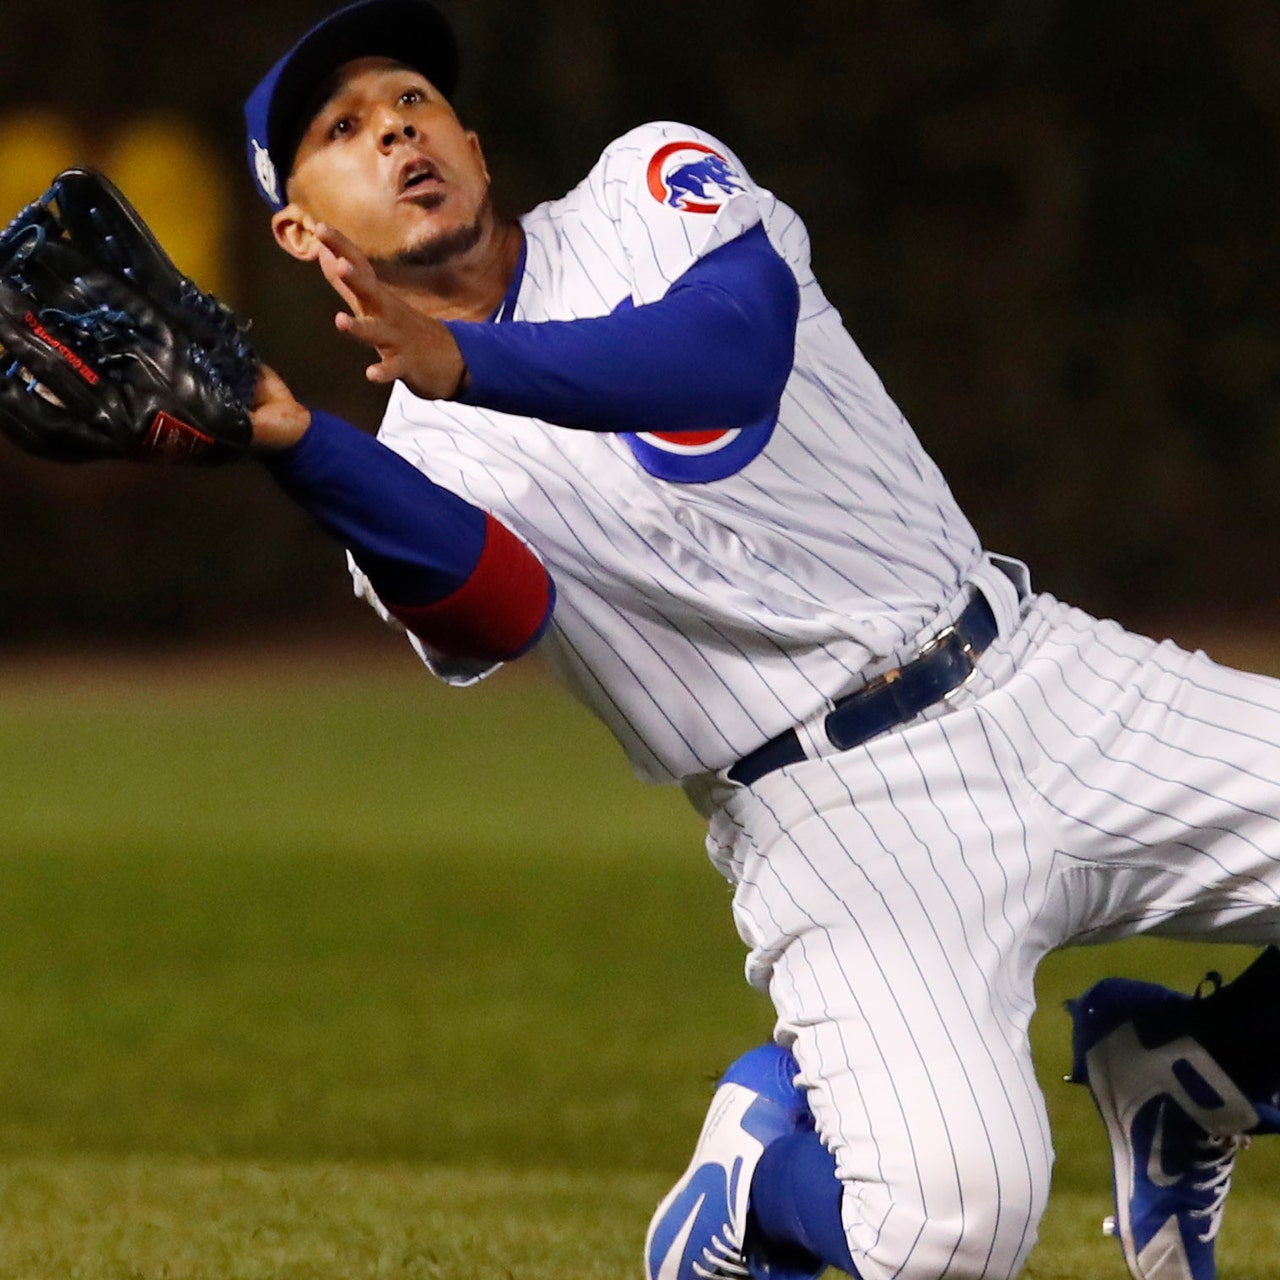 Royals sign Jon Jay to one-year deal, place Hahn on 60-day DL